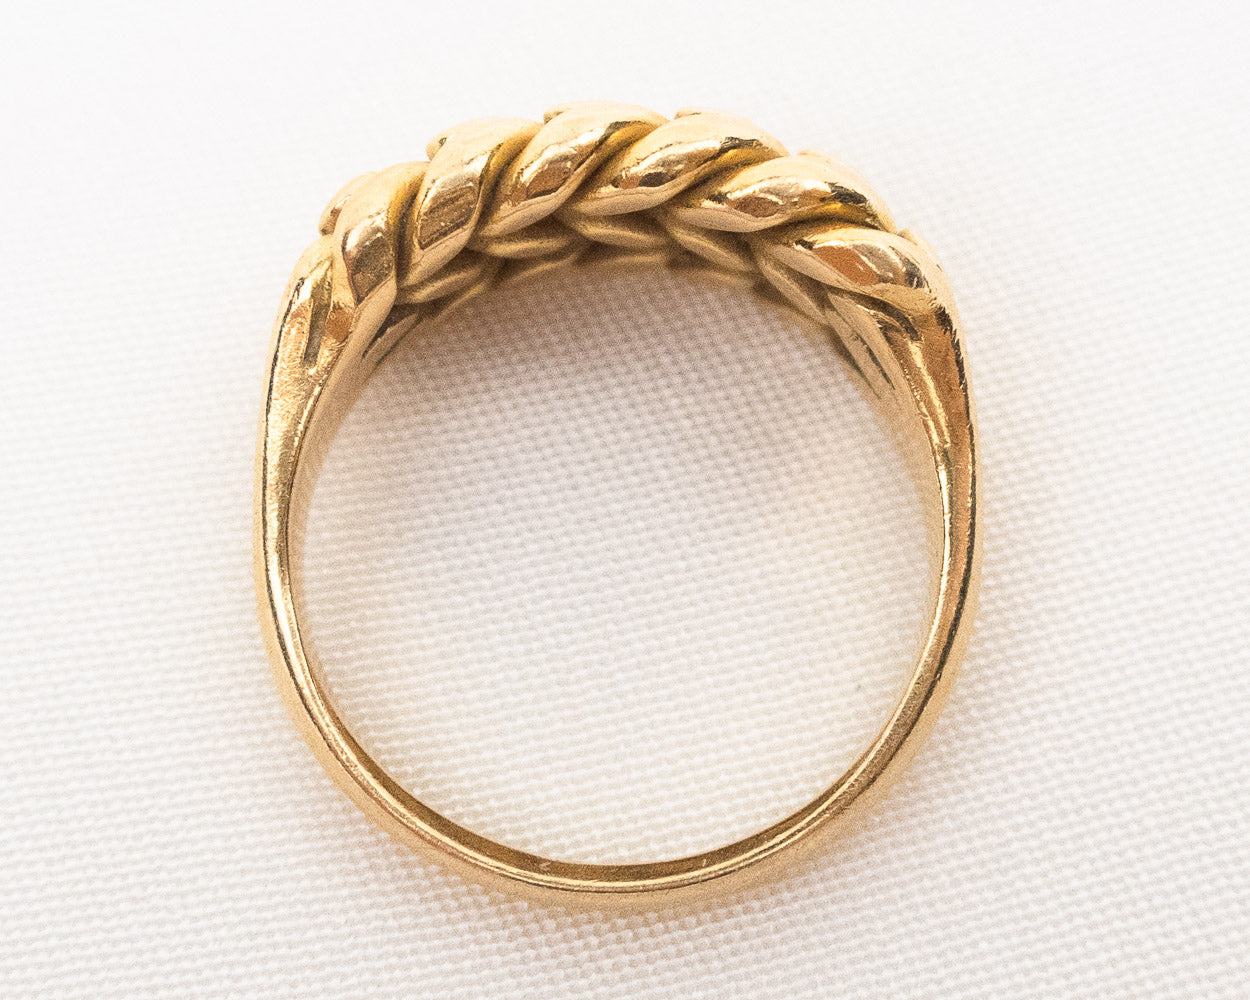 Victorian 18KT Braided Keeper Ring